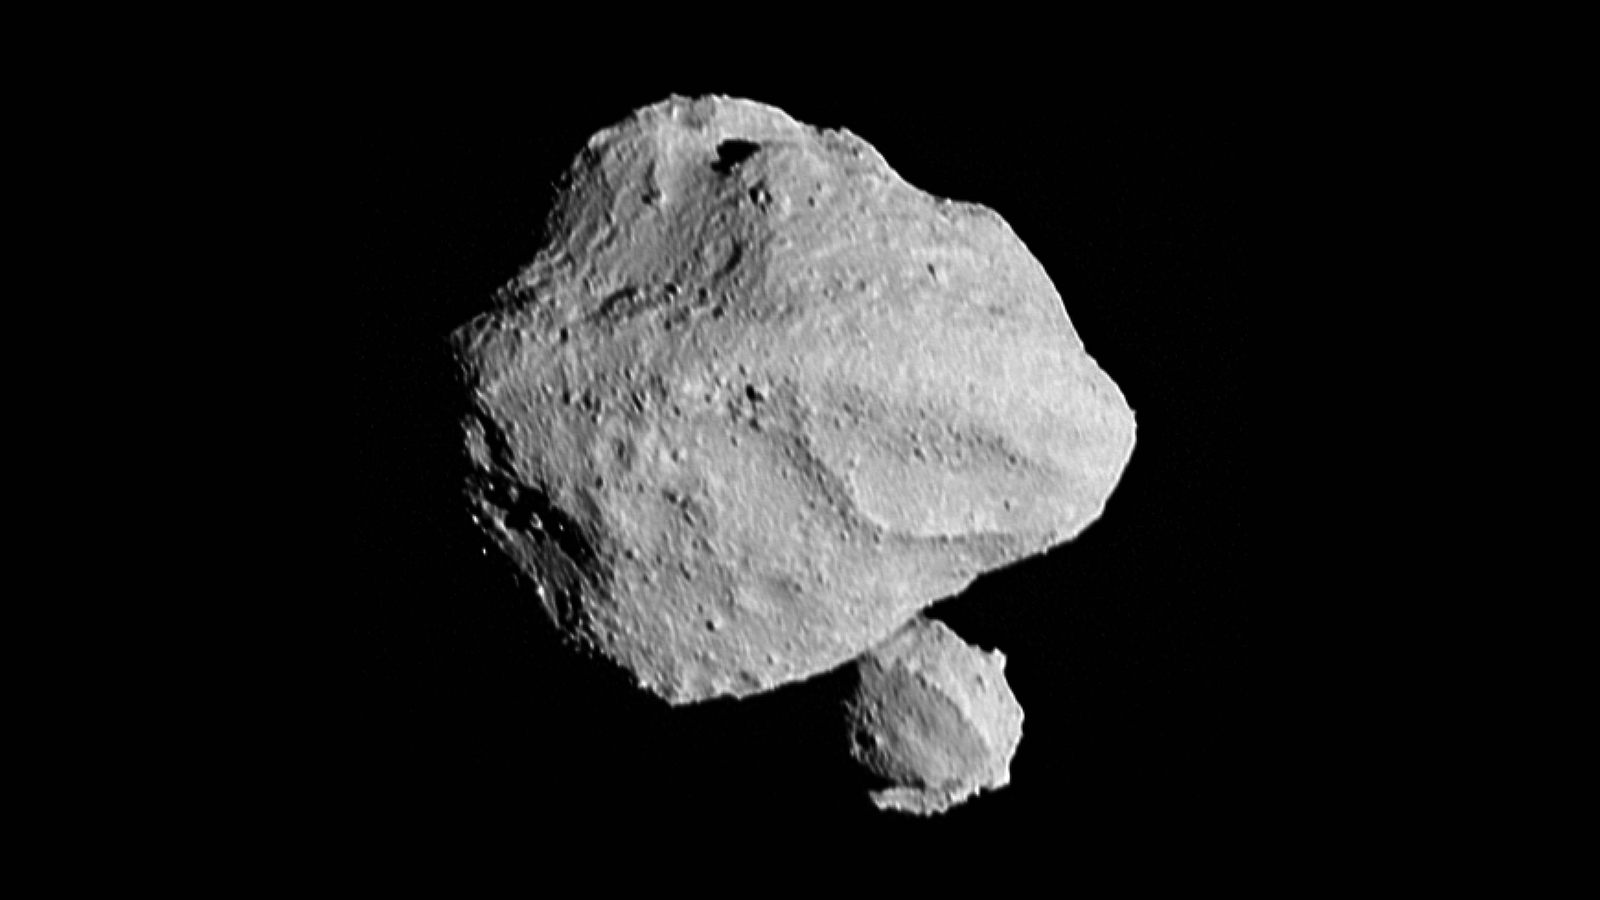 An image of the Dinkinesh asteroid and its companion